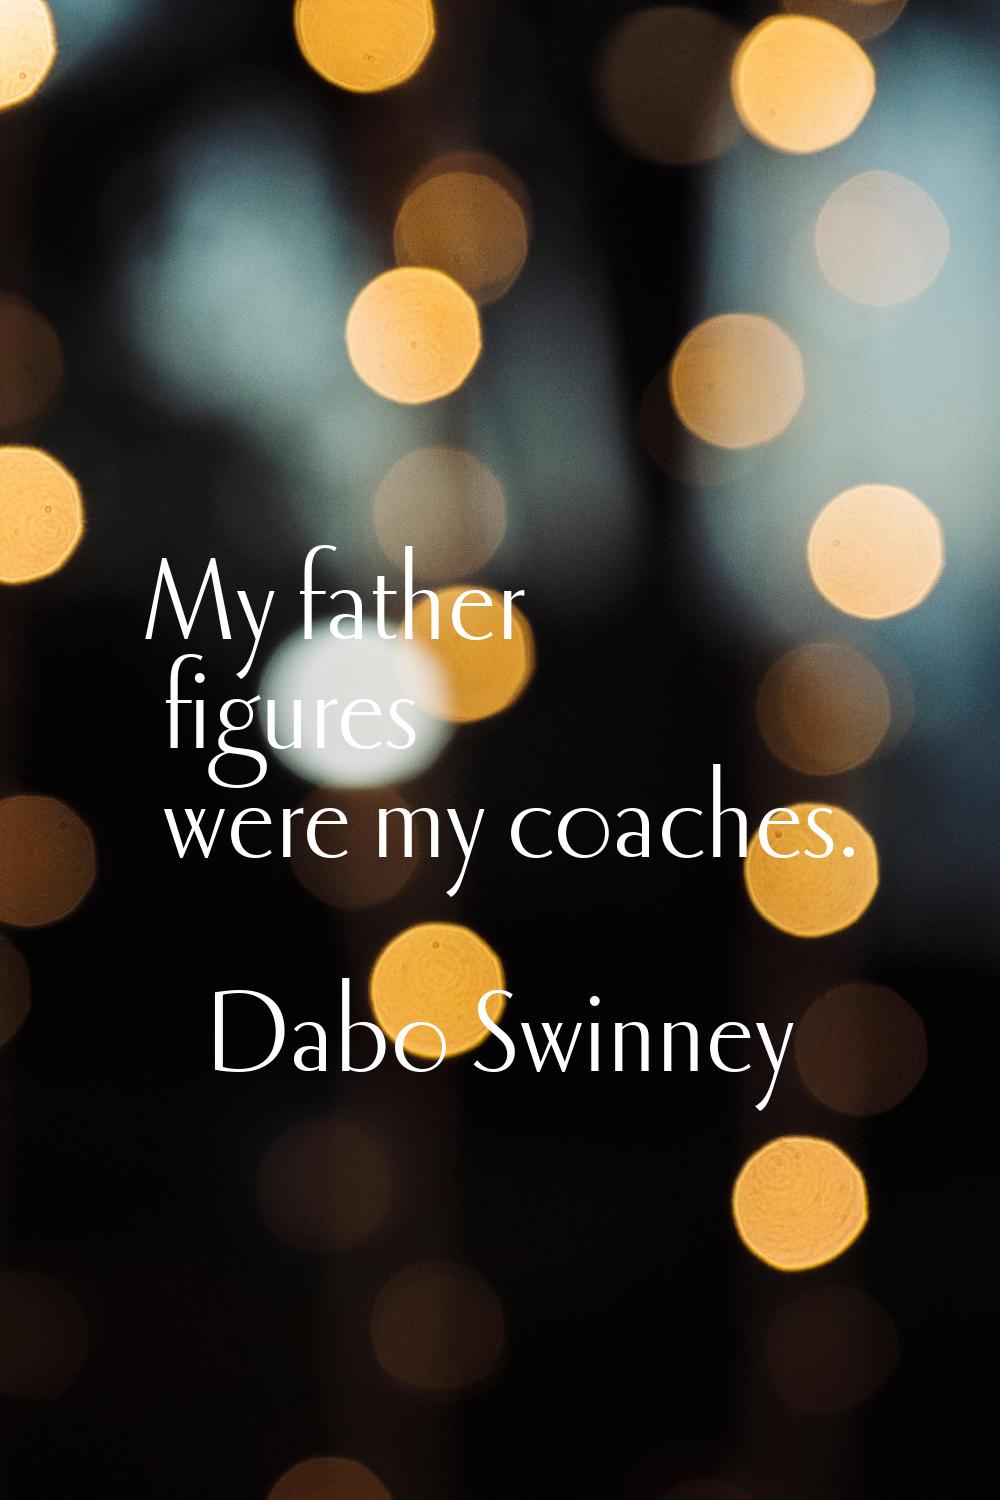 My father figures were my coaches.